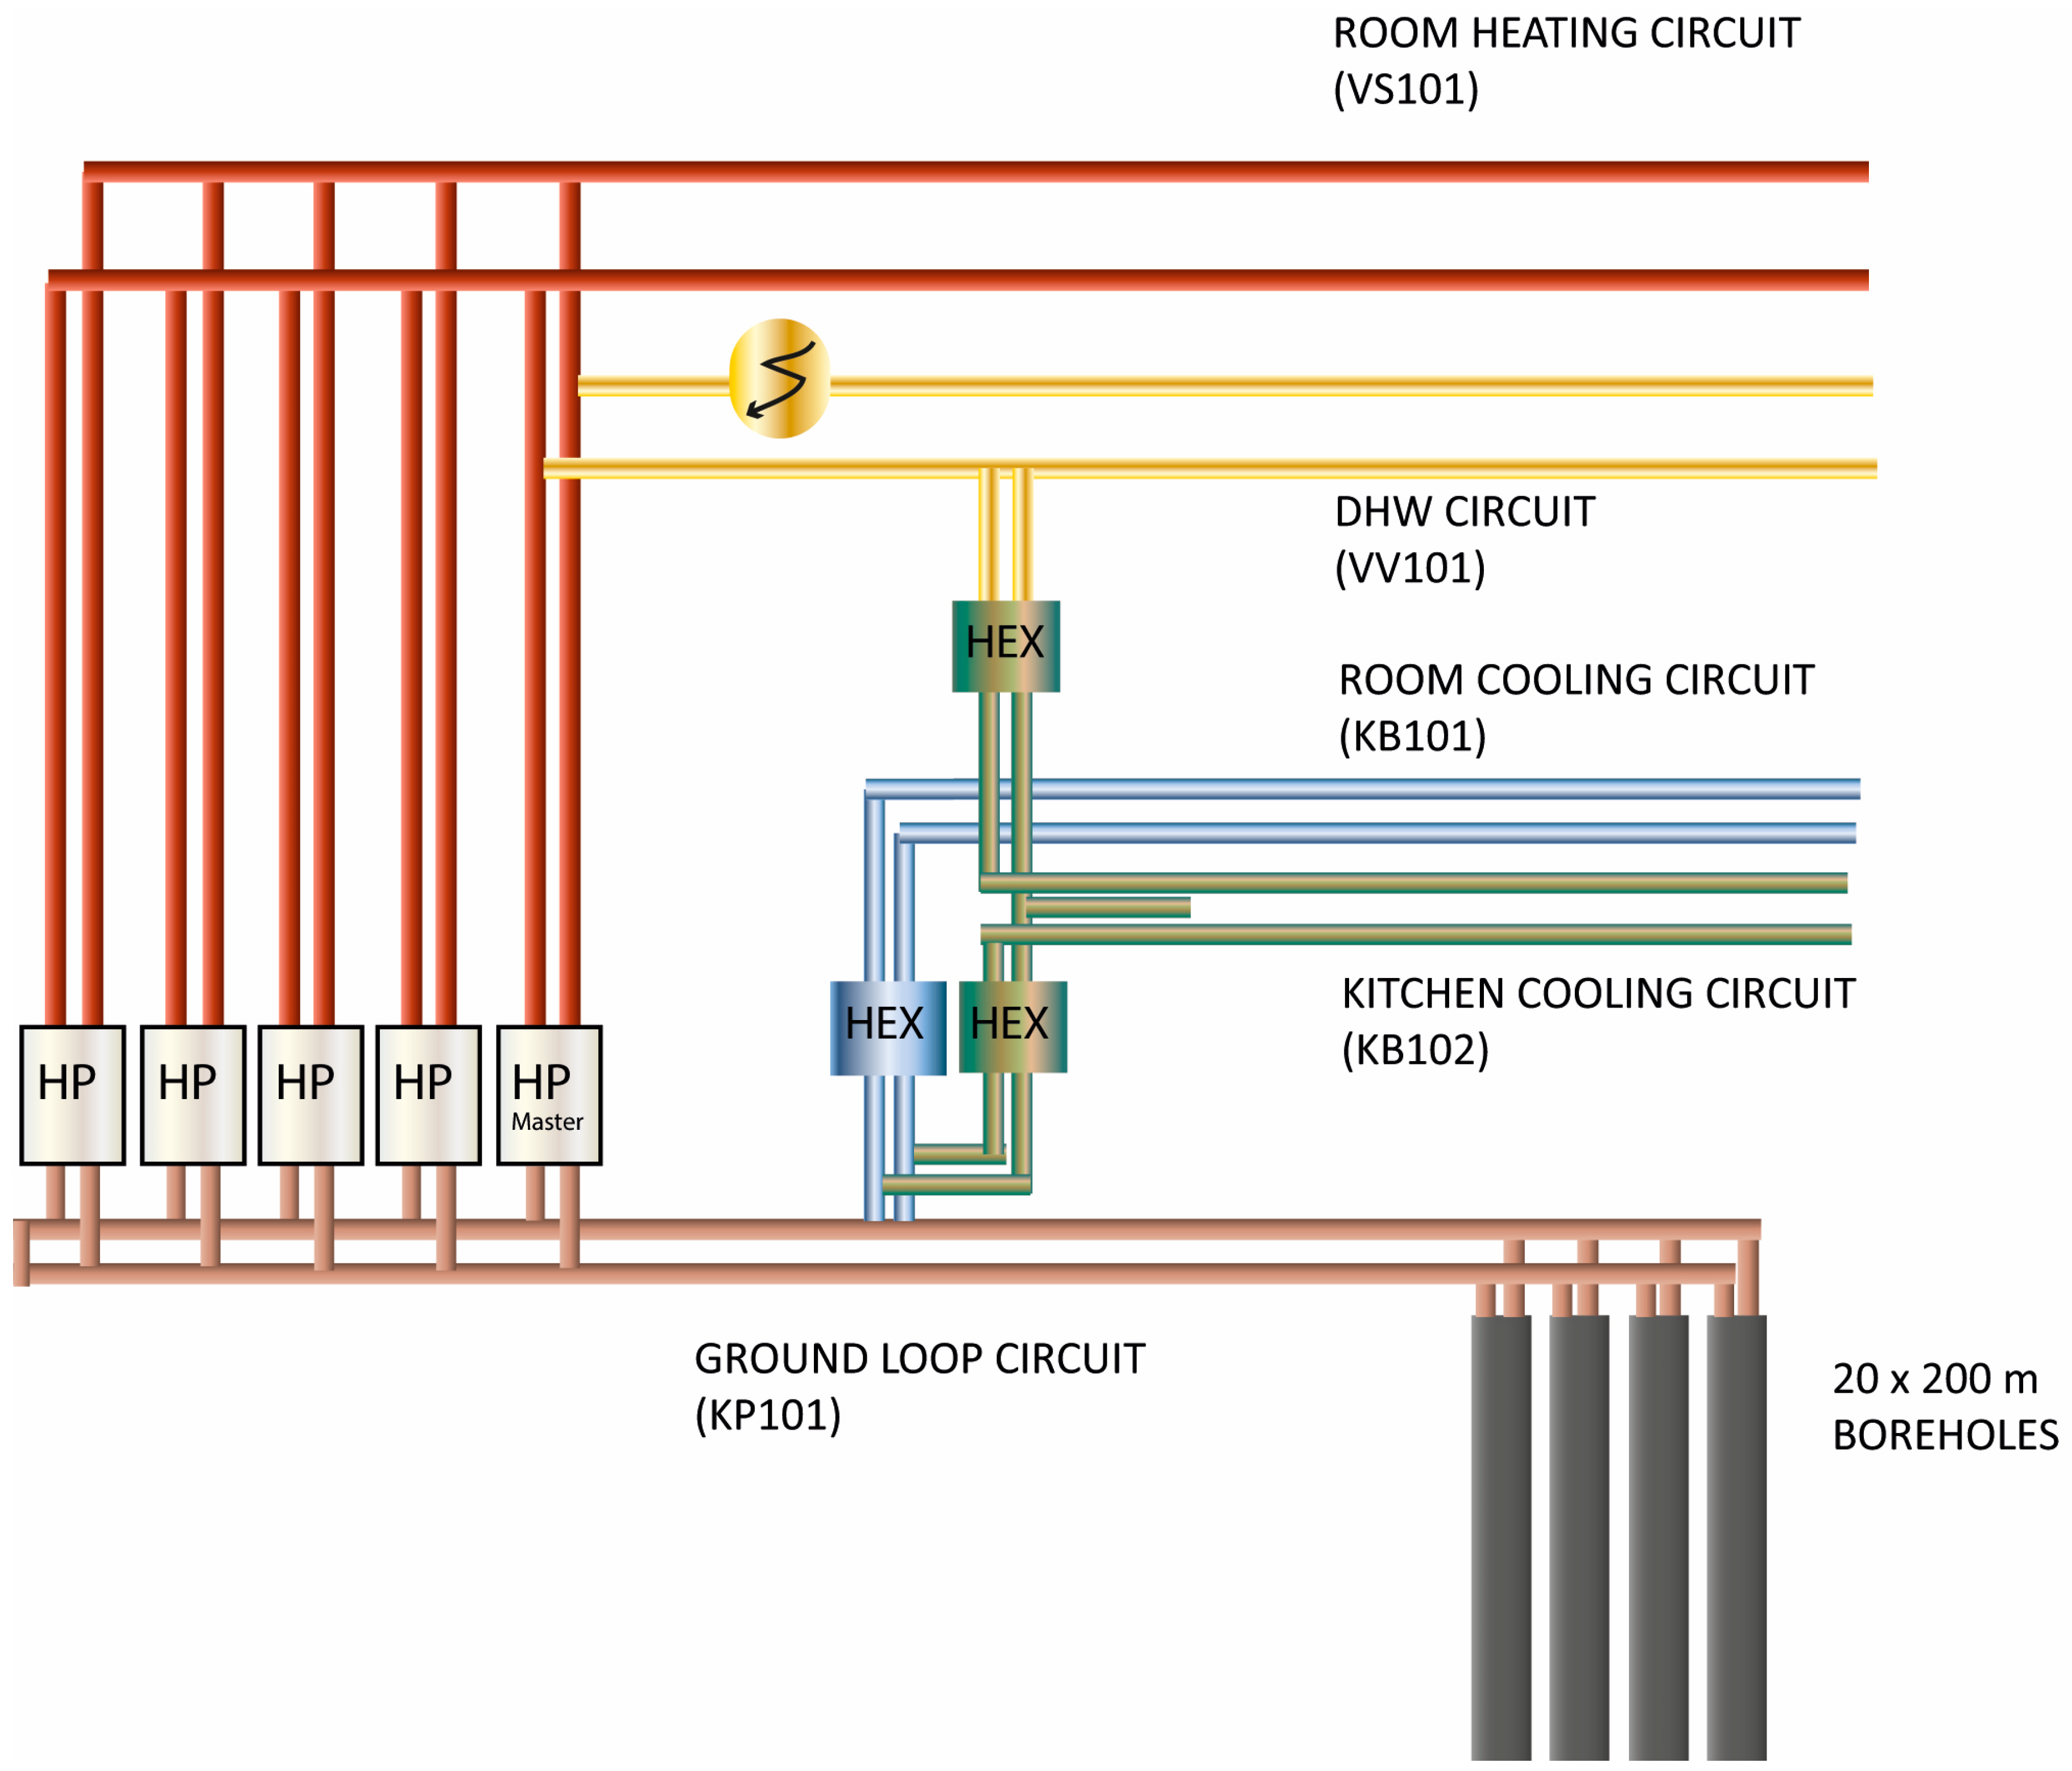 | Free Full-Text Measured Performance a Mixed-Use Commercial-Building Ground Source Heat Pump System in Sweden | HTML